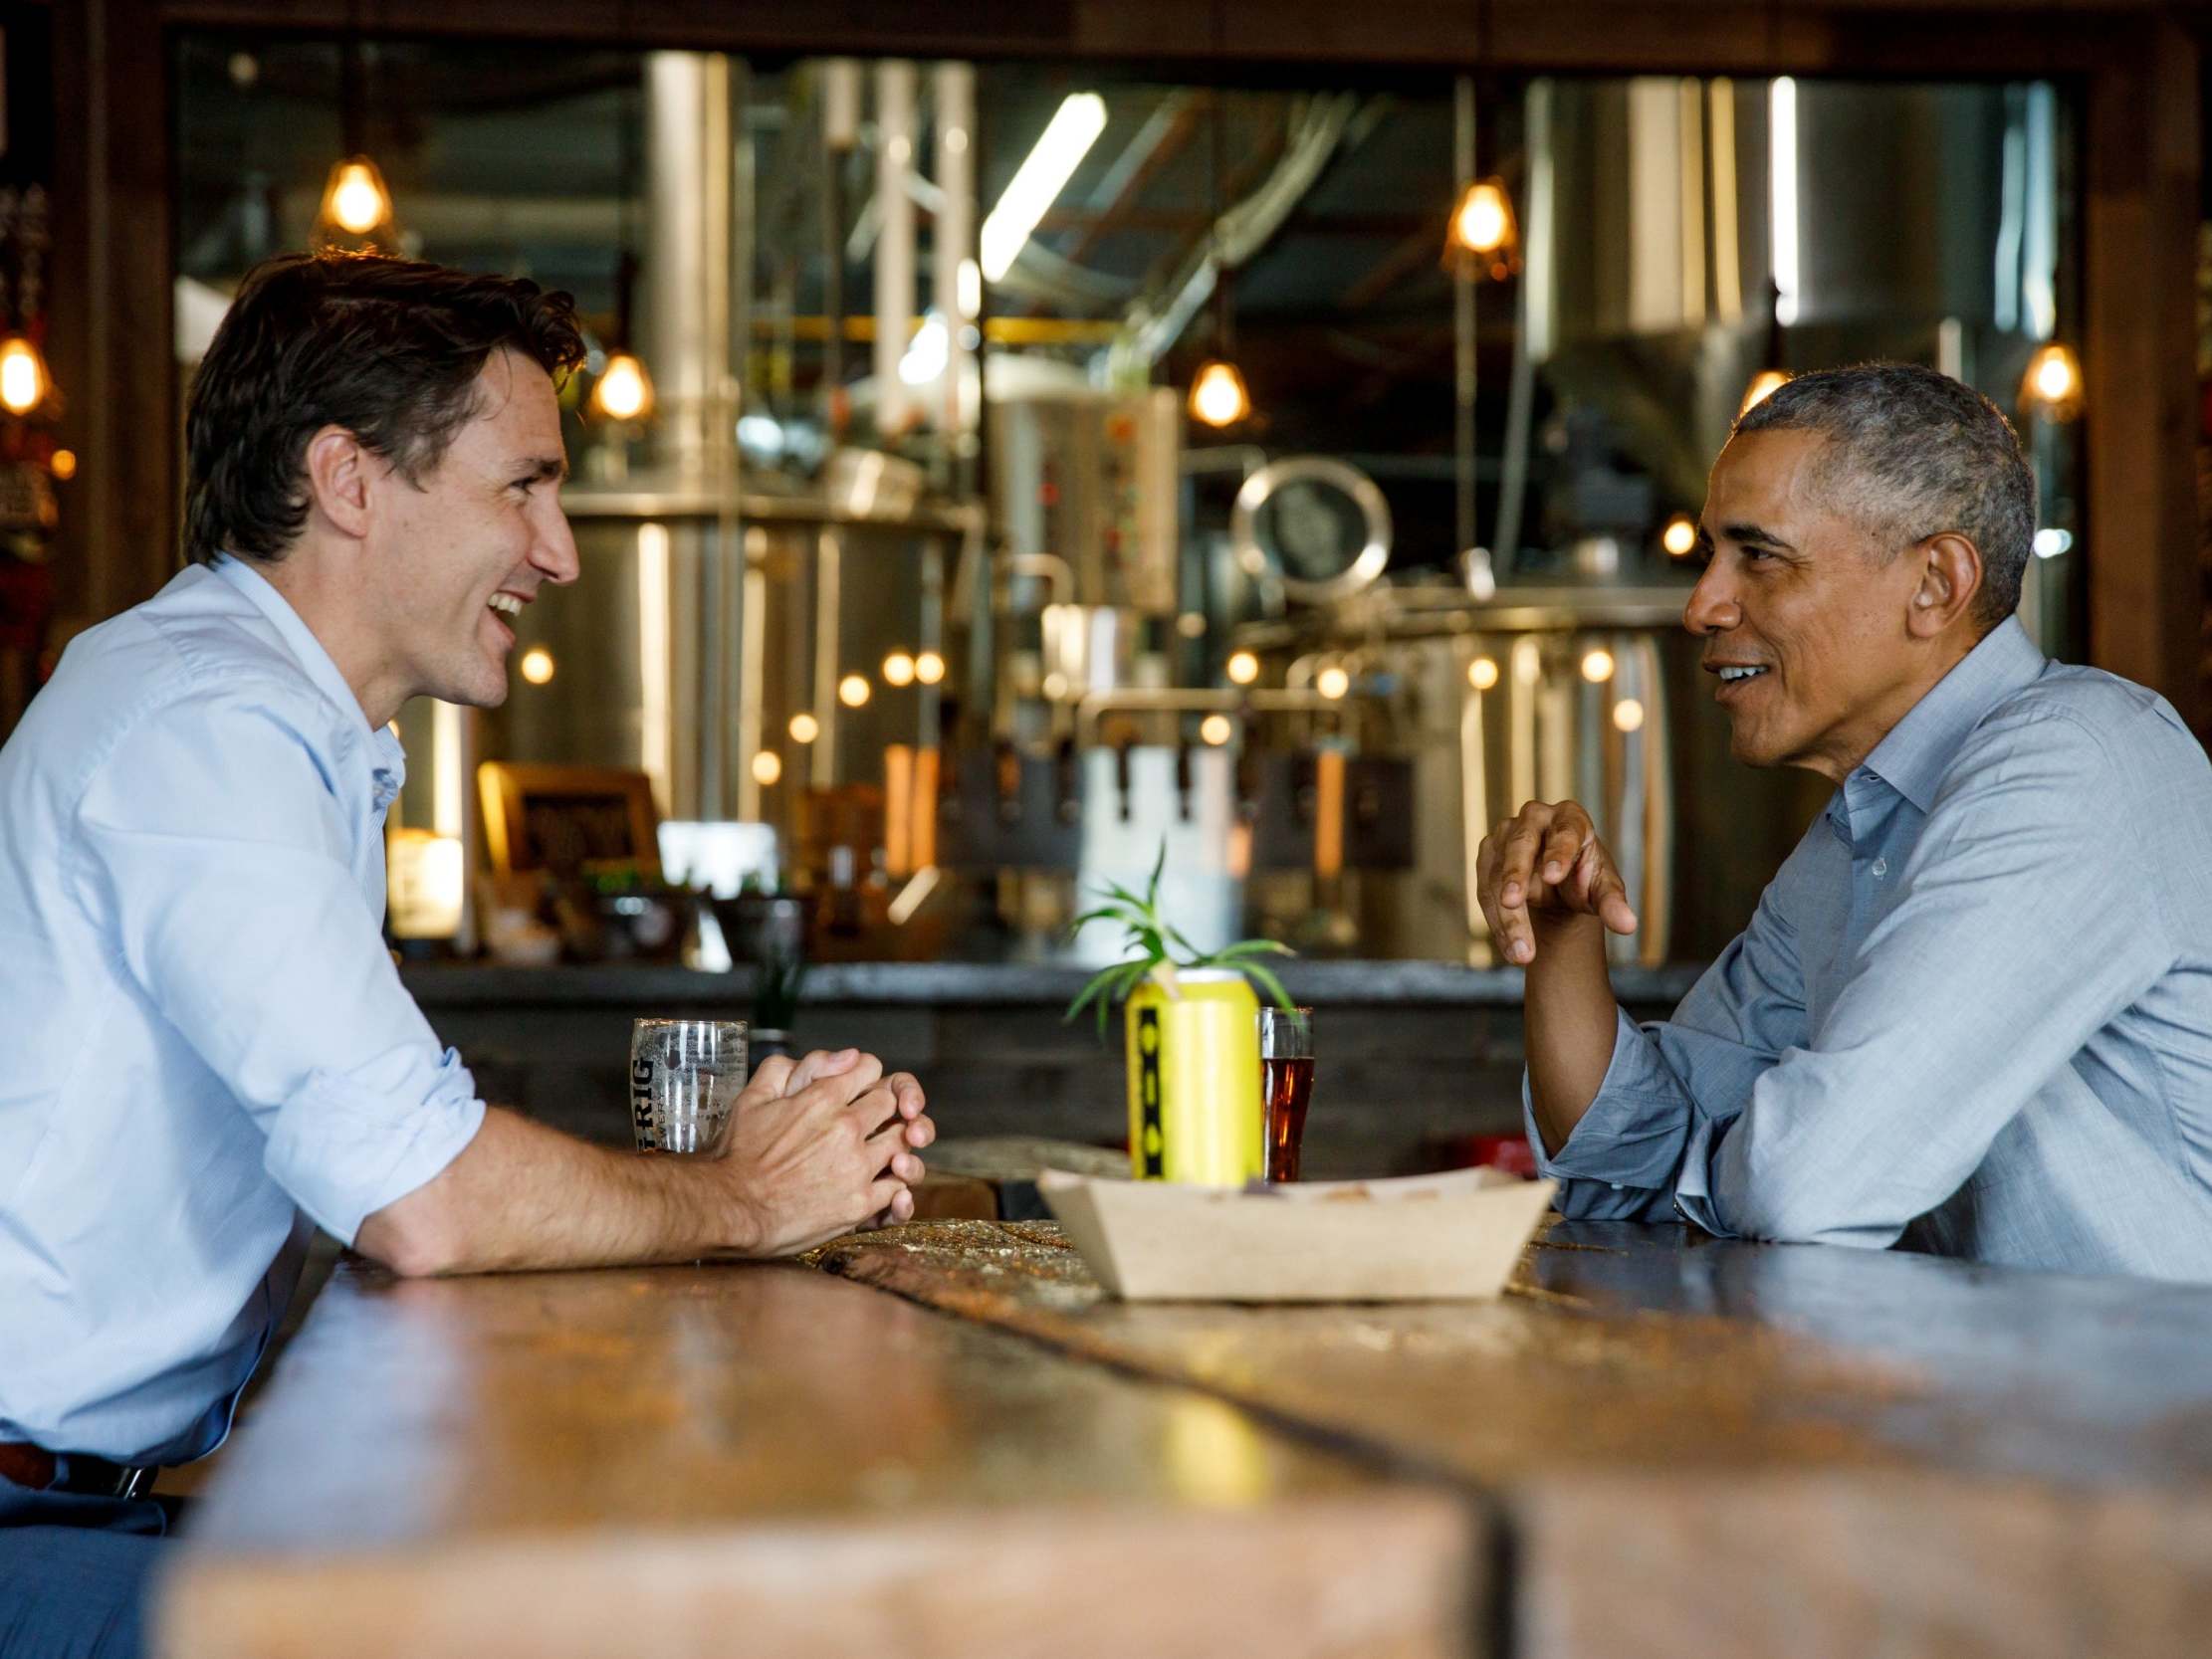 Barack Obama, pictured here at an Ontario brewery with Justin Trudeau in May, said 'the world needs his progressive leadership now'